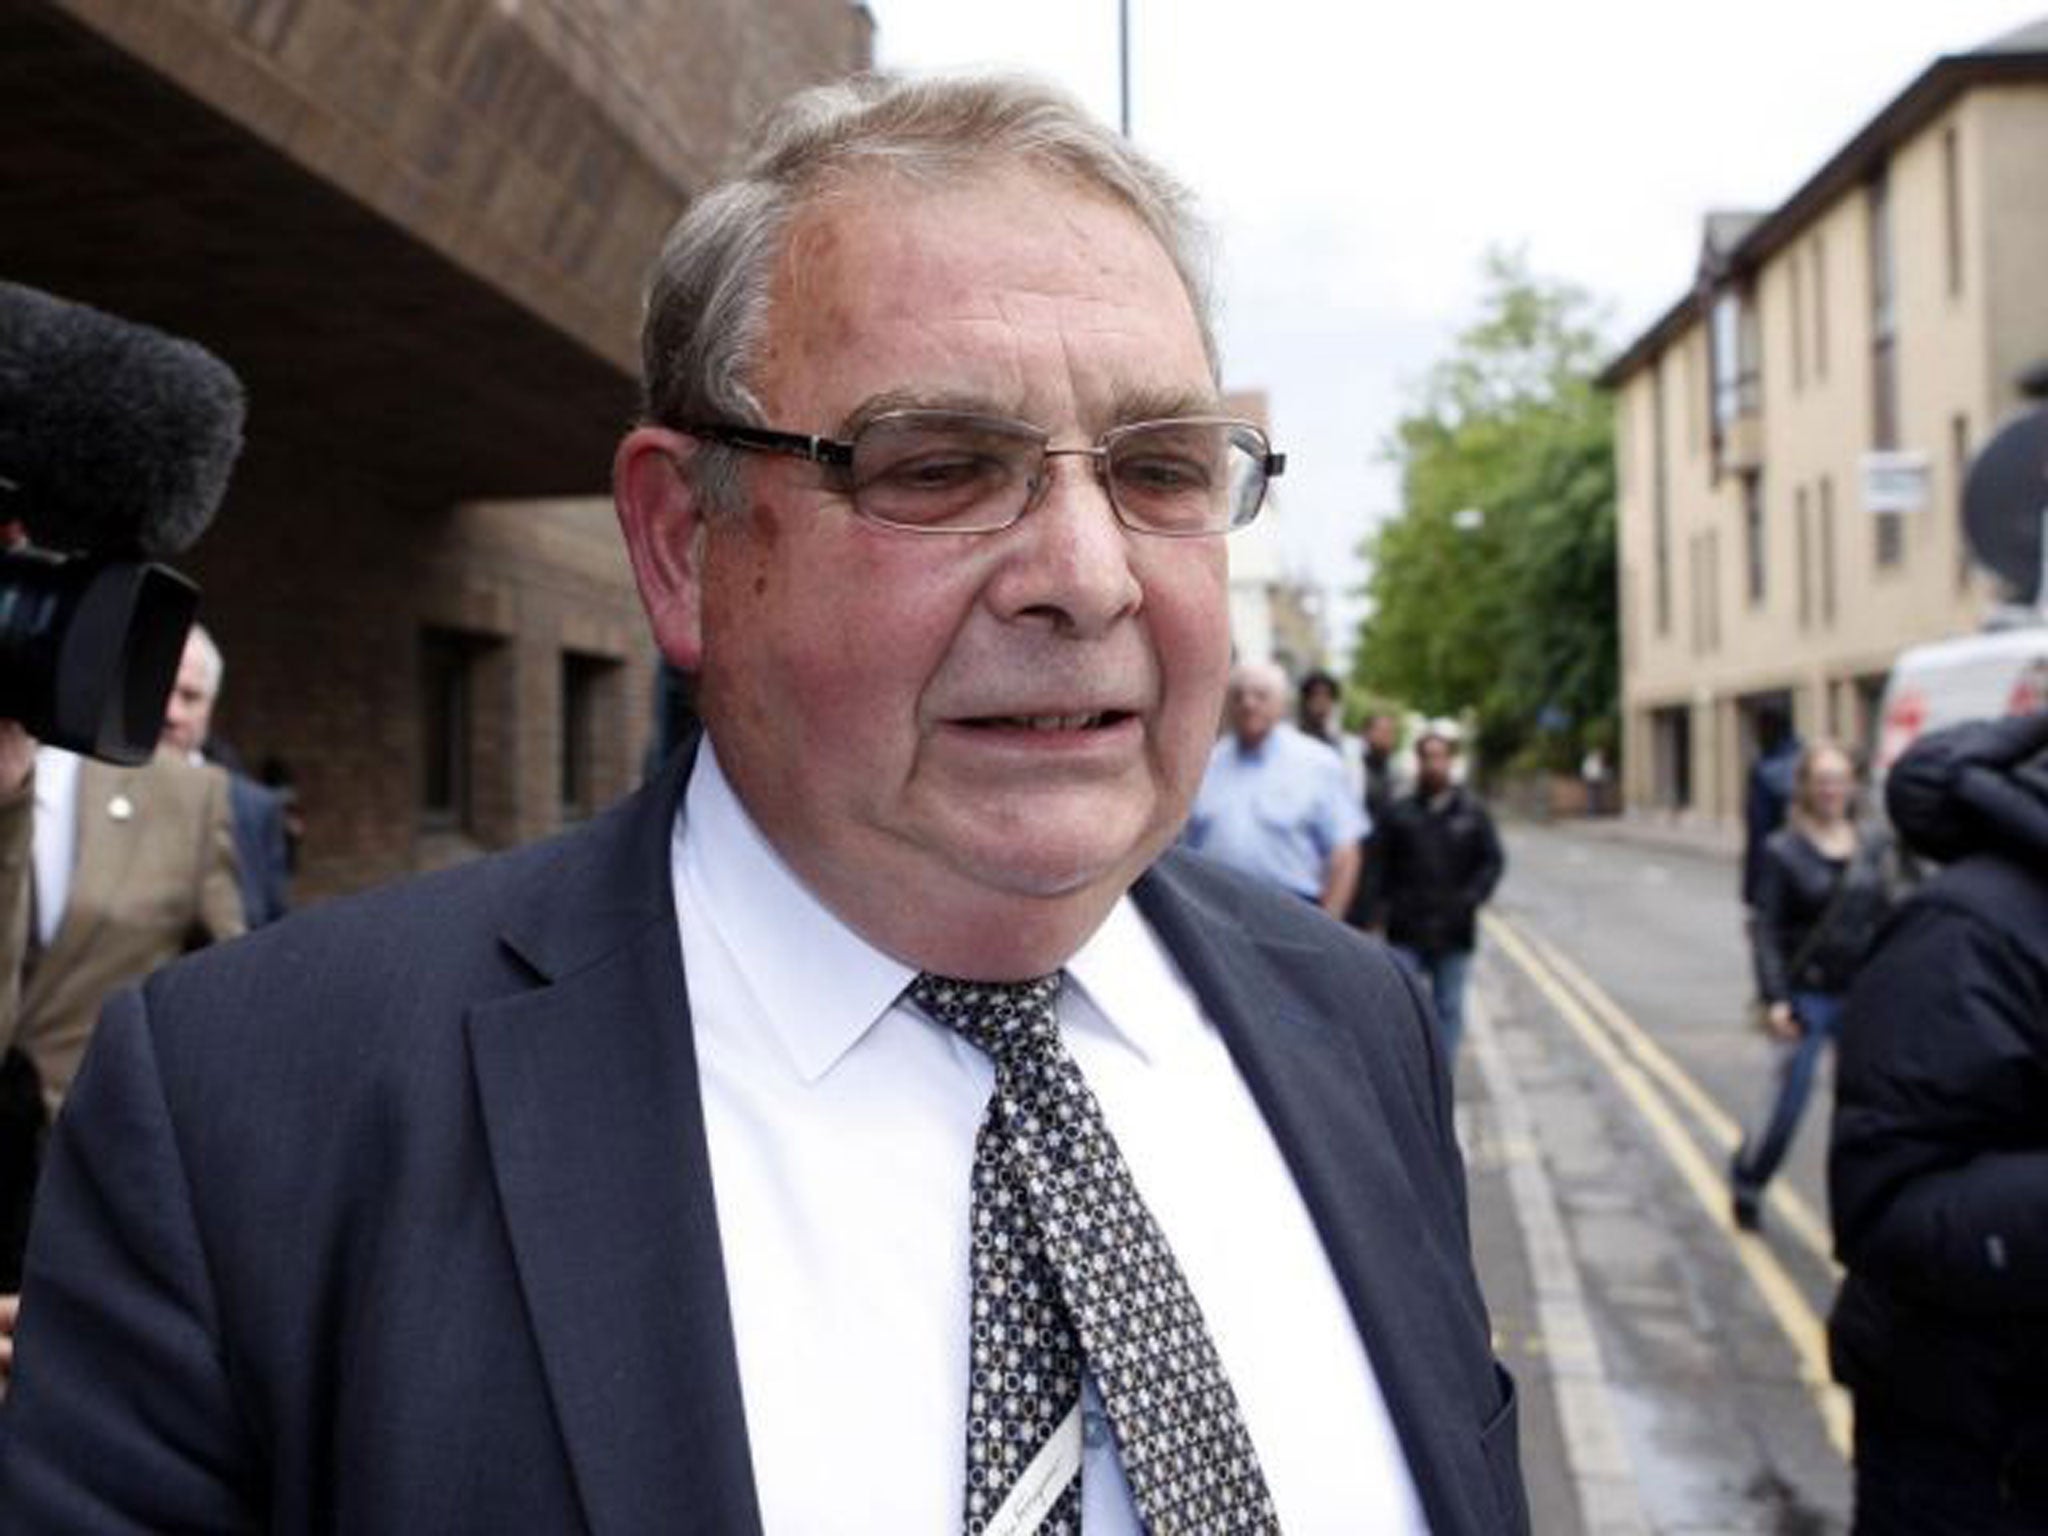 Lord Hanningfield who has defended regularly "clocking in" to claim a £300 daily attendance allowance